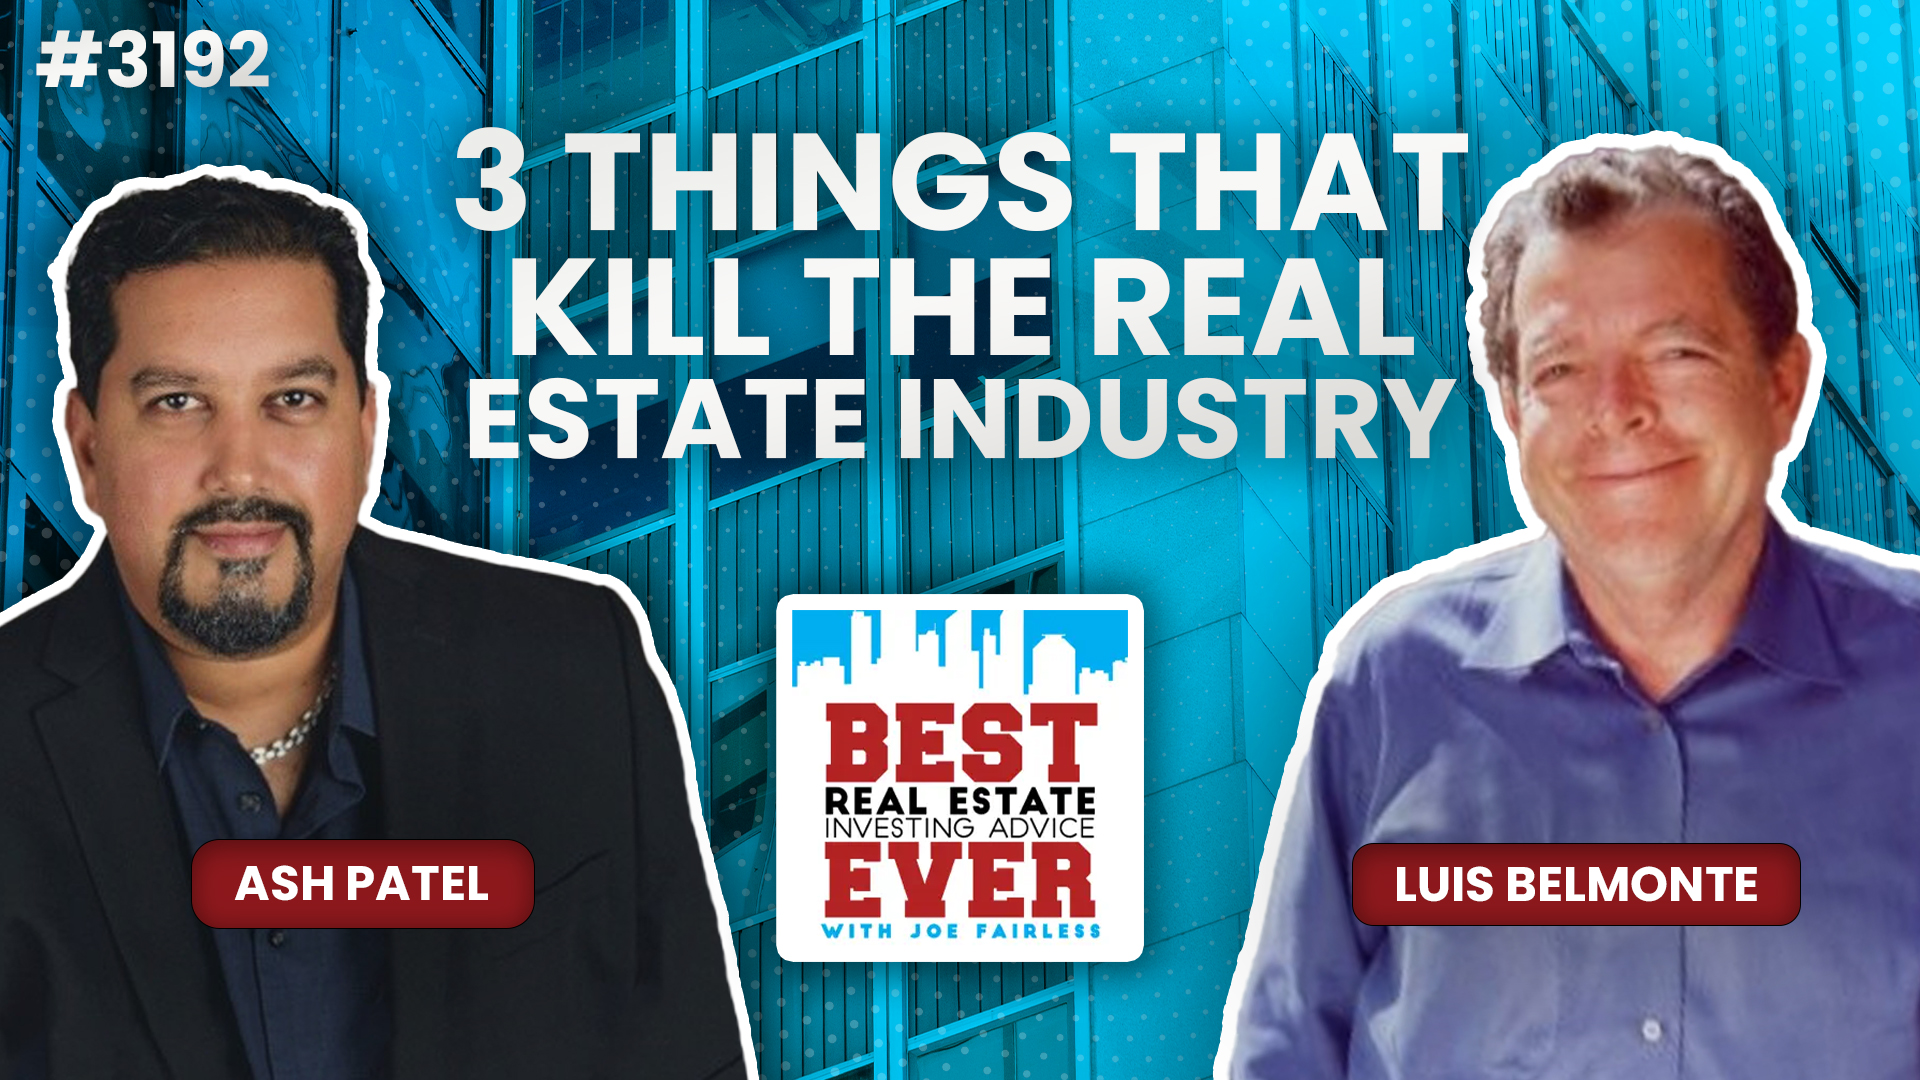 JF3192: 3 Things That Kill the Real Estate Industry ft. Luis Belmonte